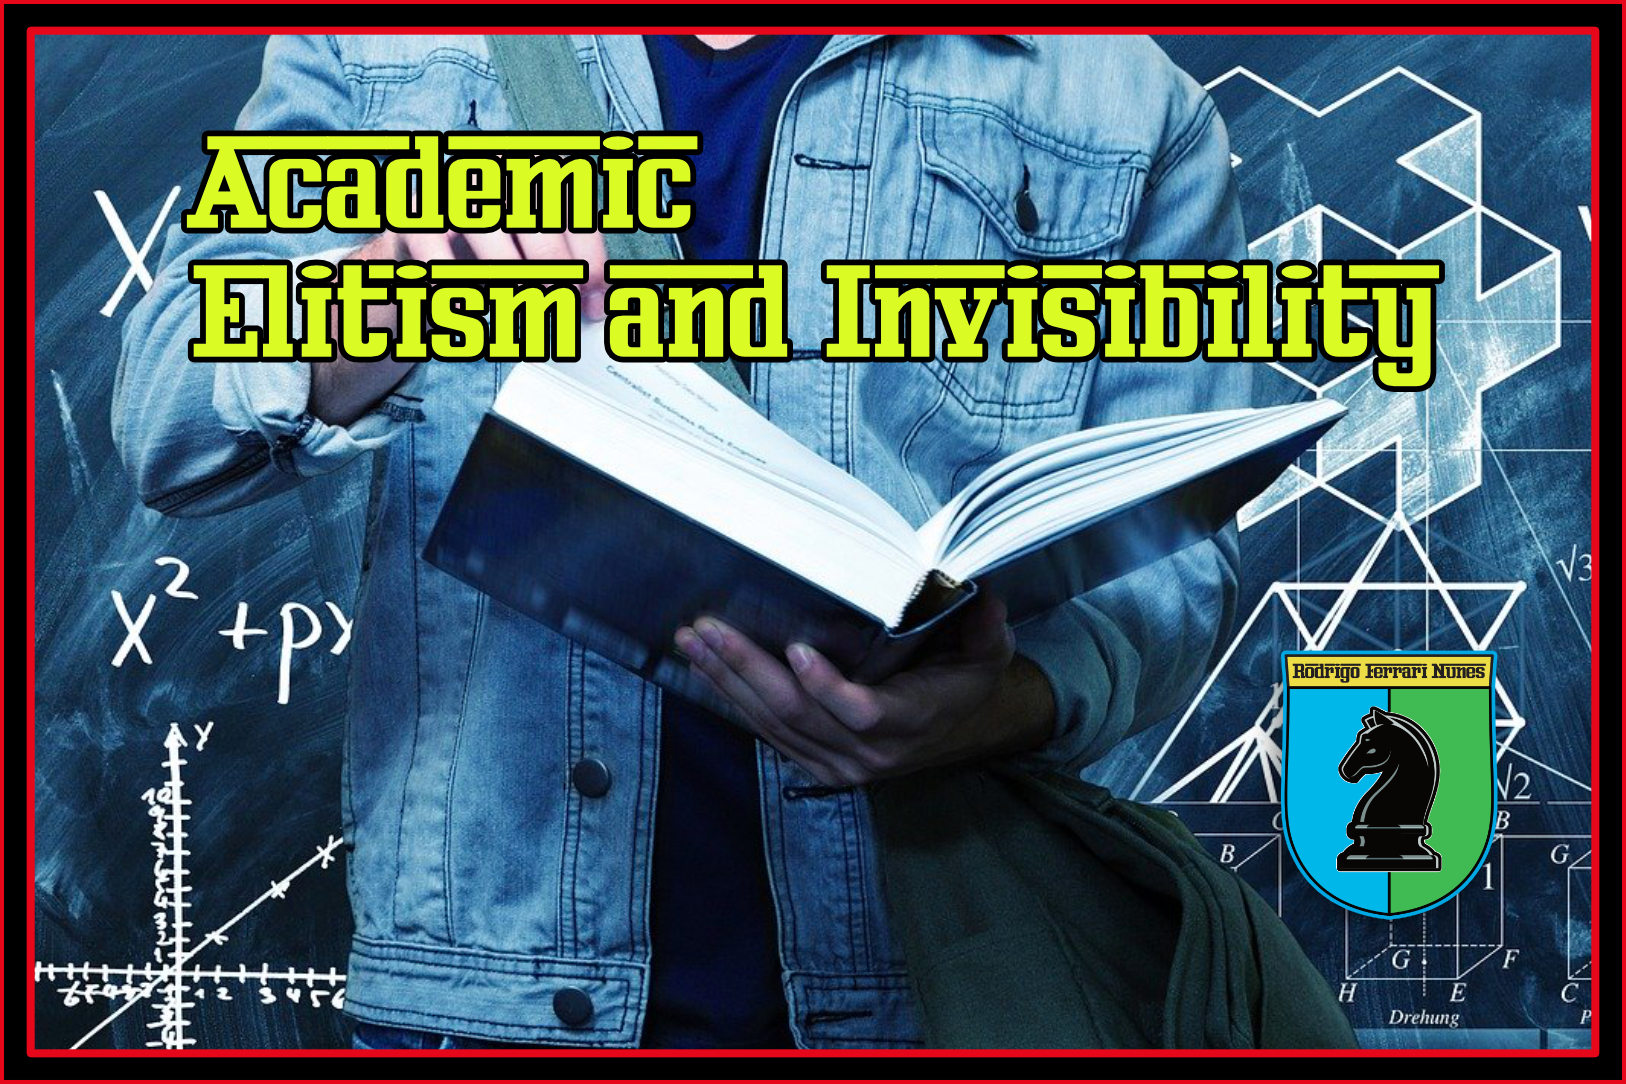 The Cycle of Invisibility and Academic Elitism